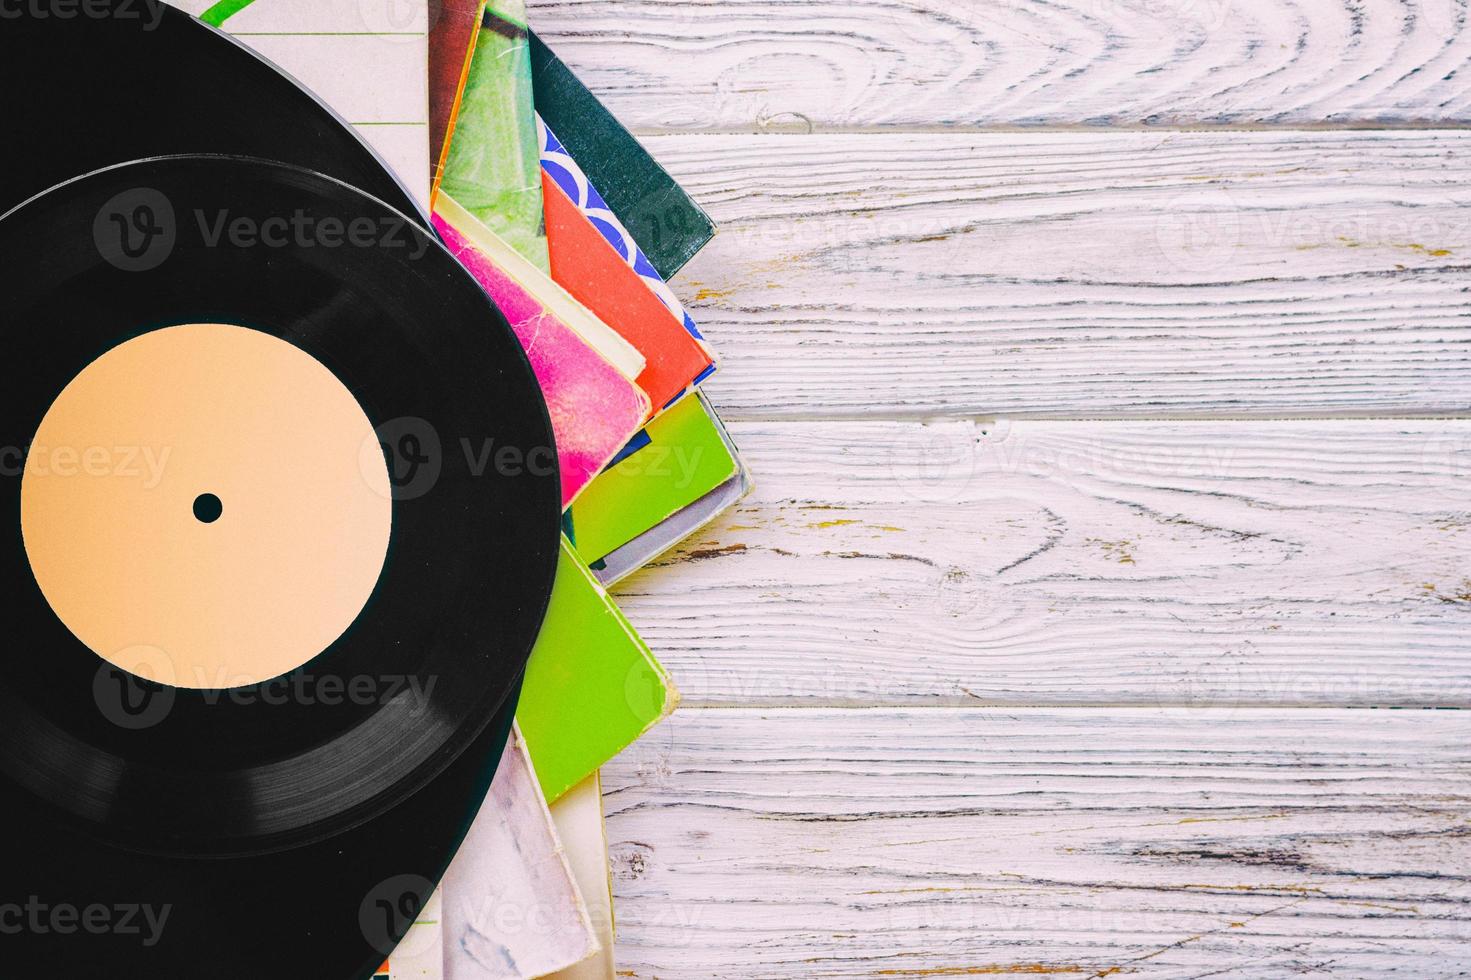 Retro styled image of a collection of old vinyl record lp's with sleeves on a wooden background with Copy space top view toned photo